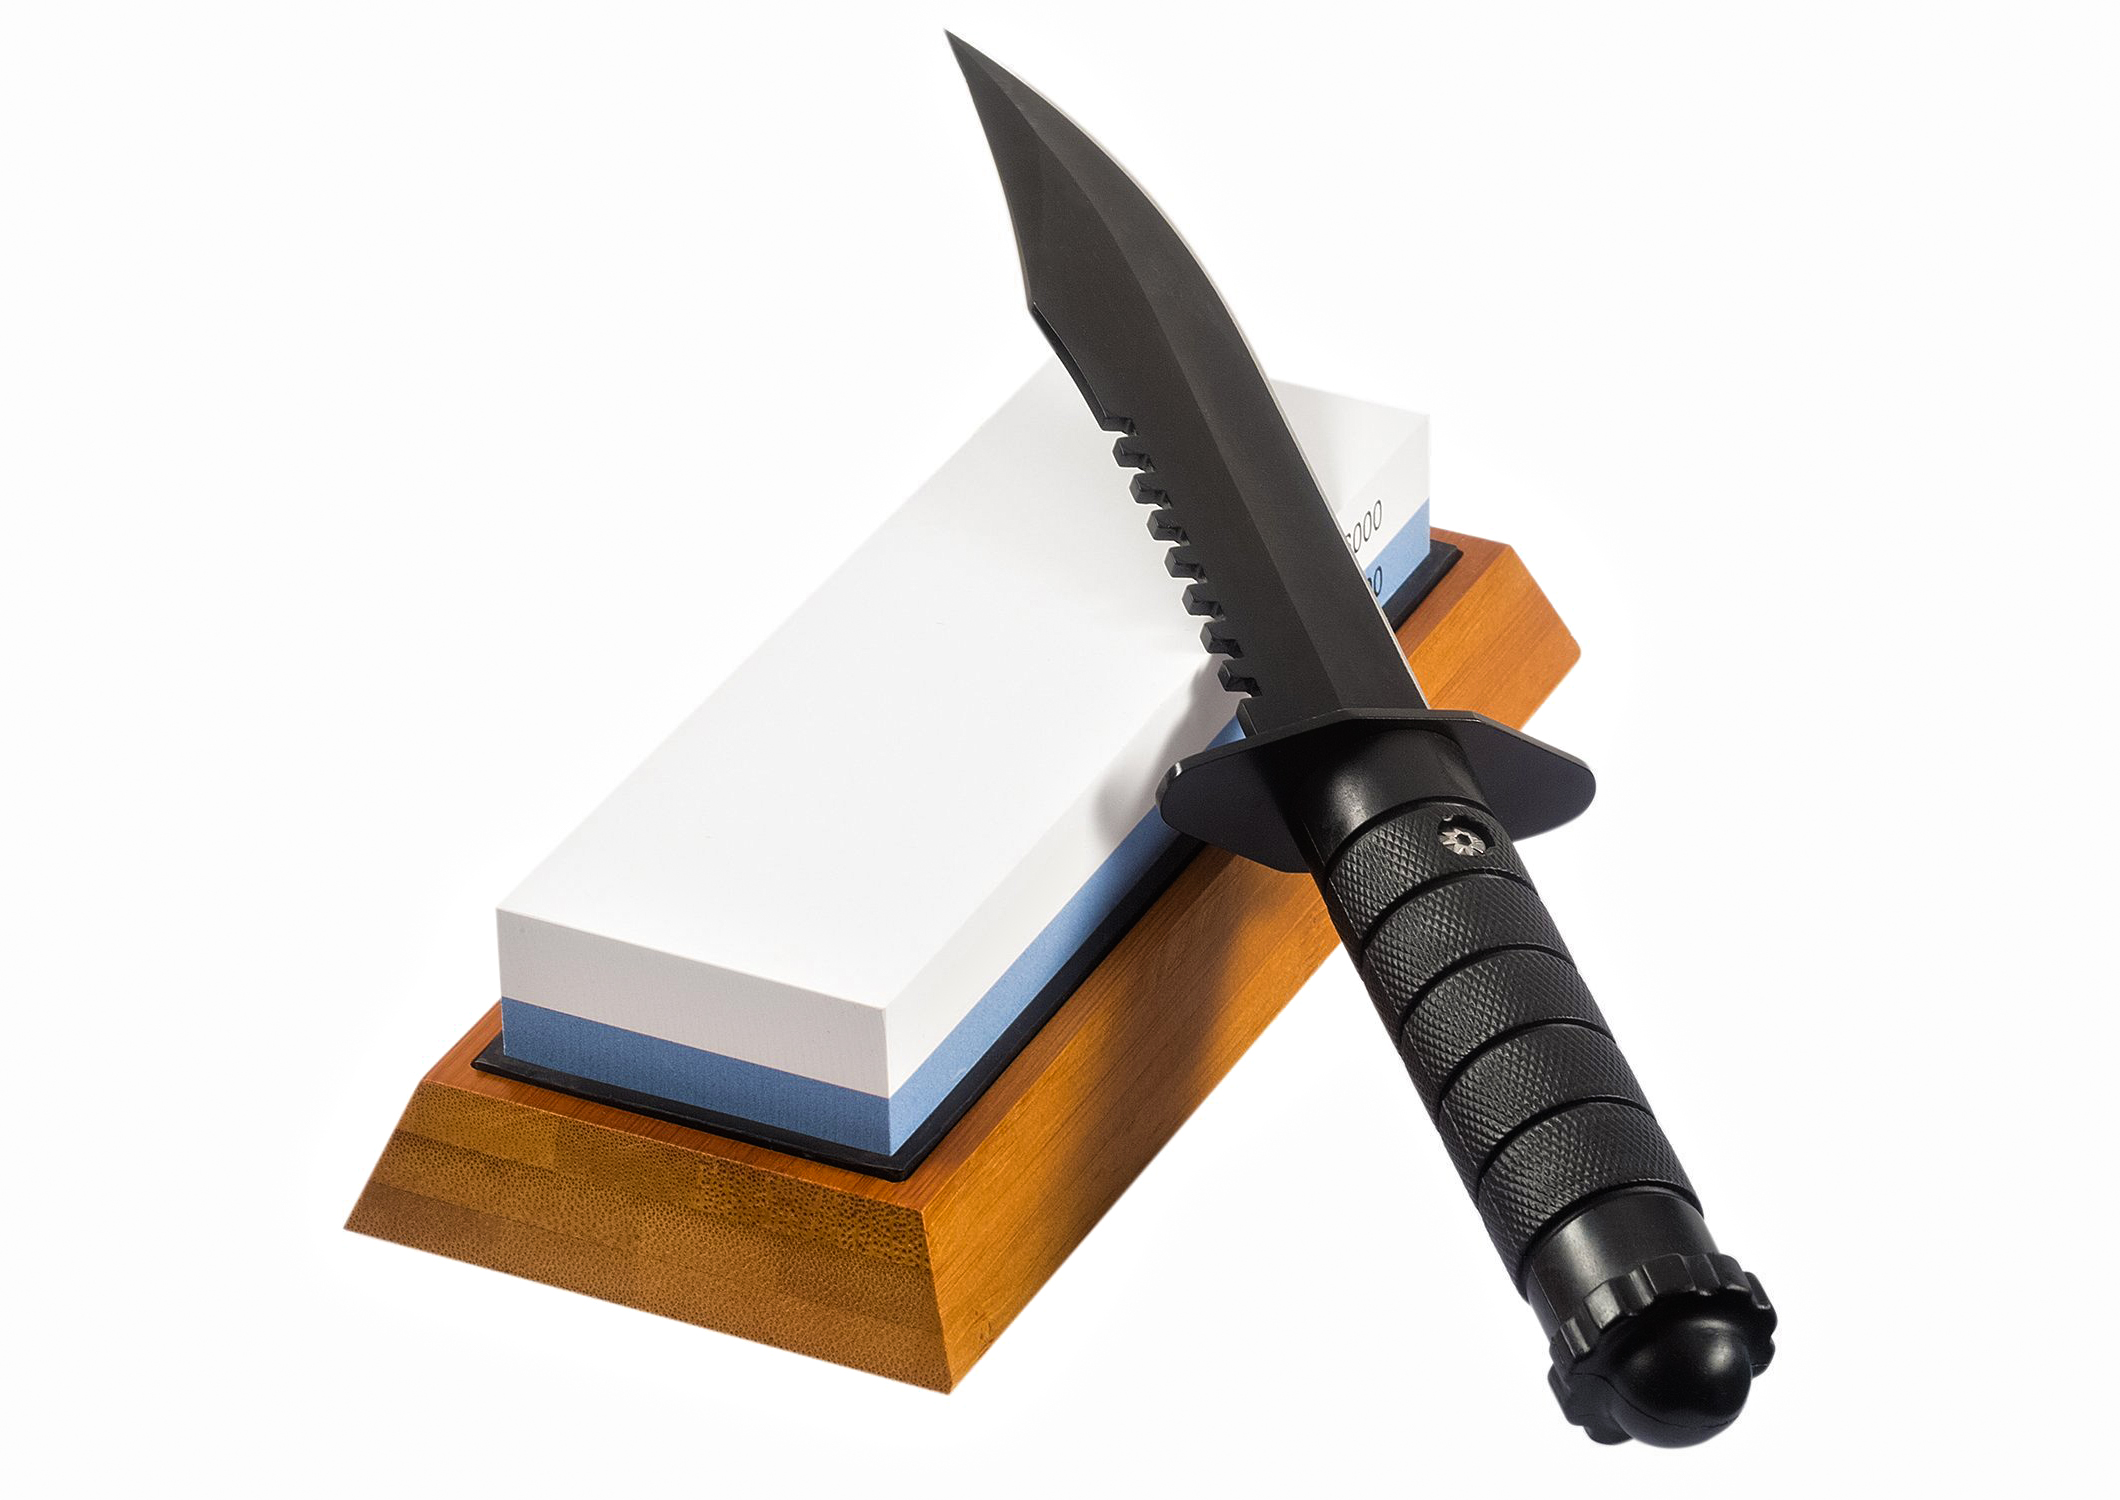 hunting knife and a whetstone to sharpen the knife